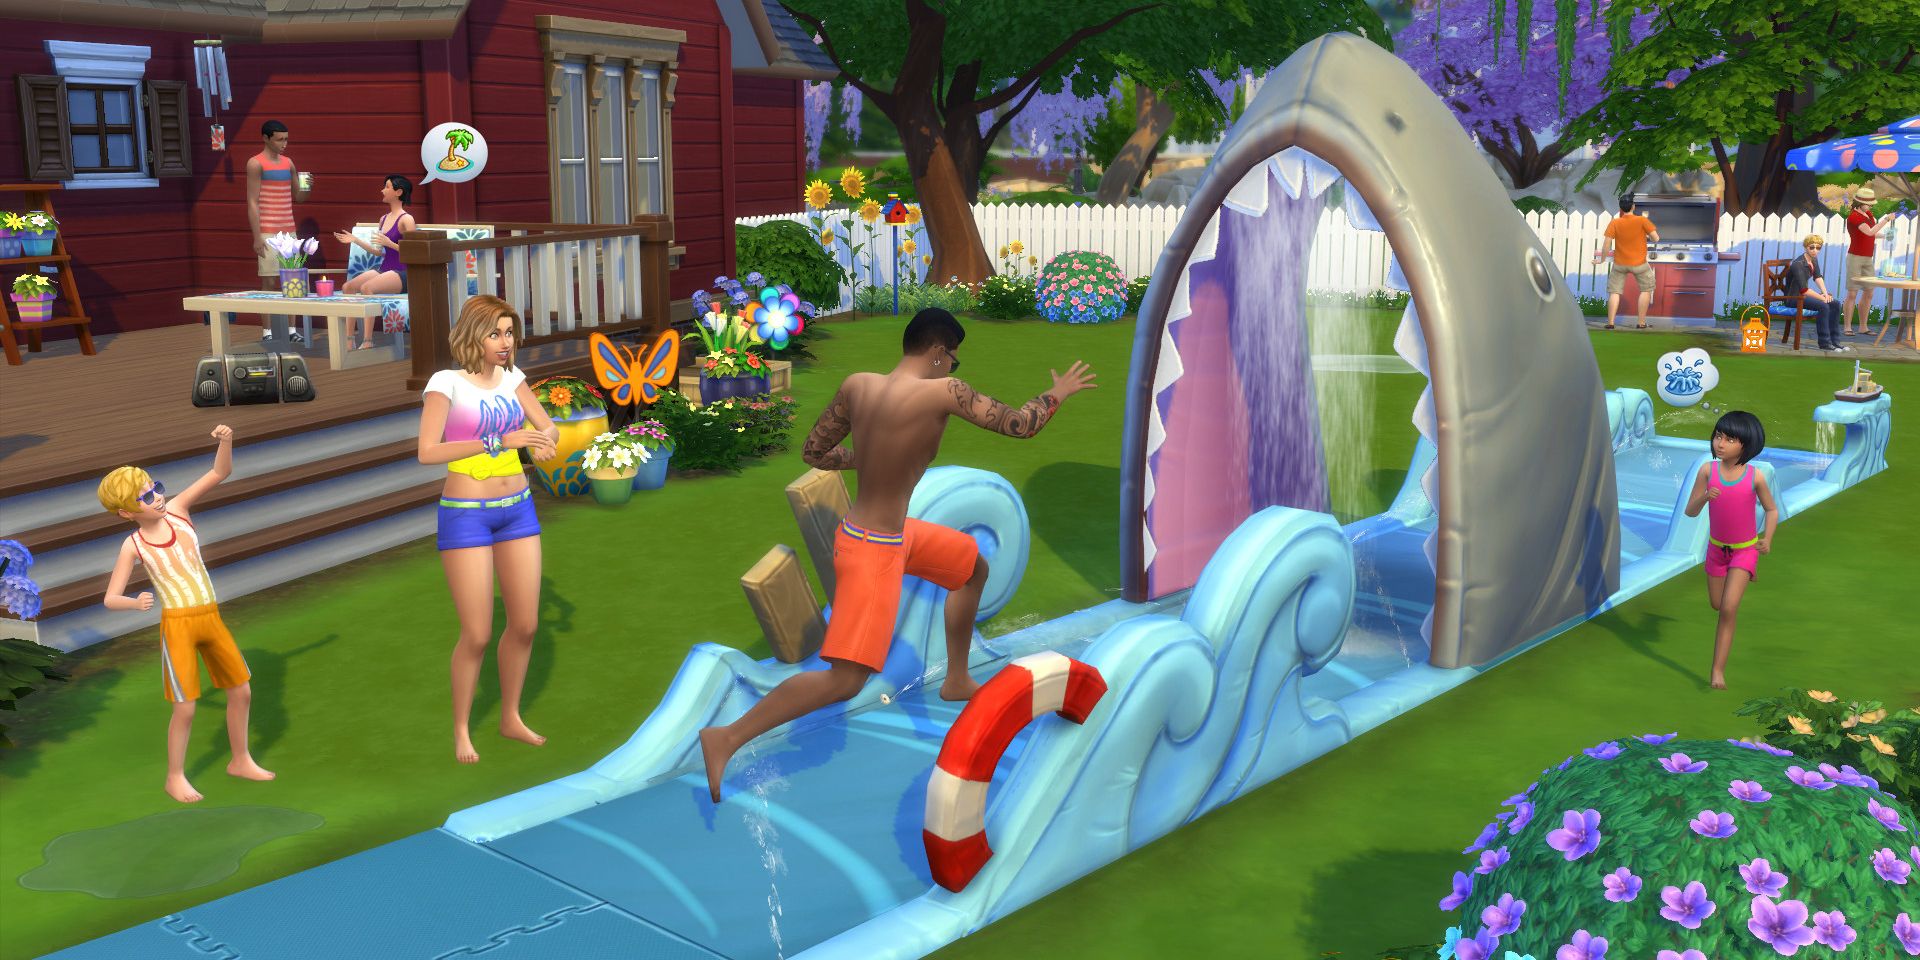 A screenshot of The Sims 4 Backyard Stuff DLC with several characters having fun with a water slide.